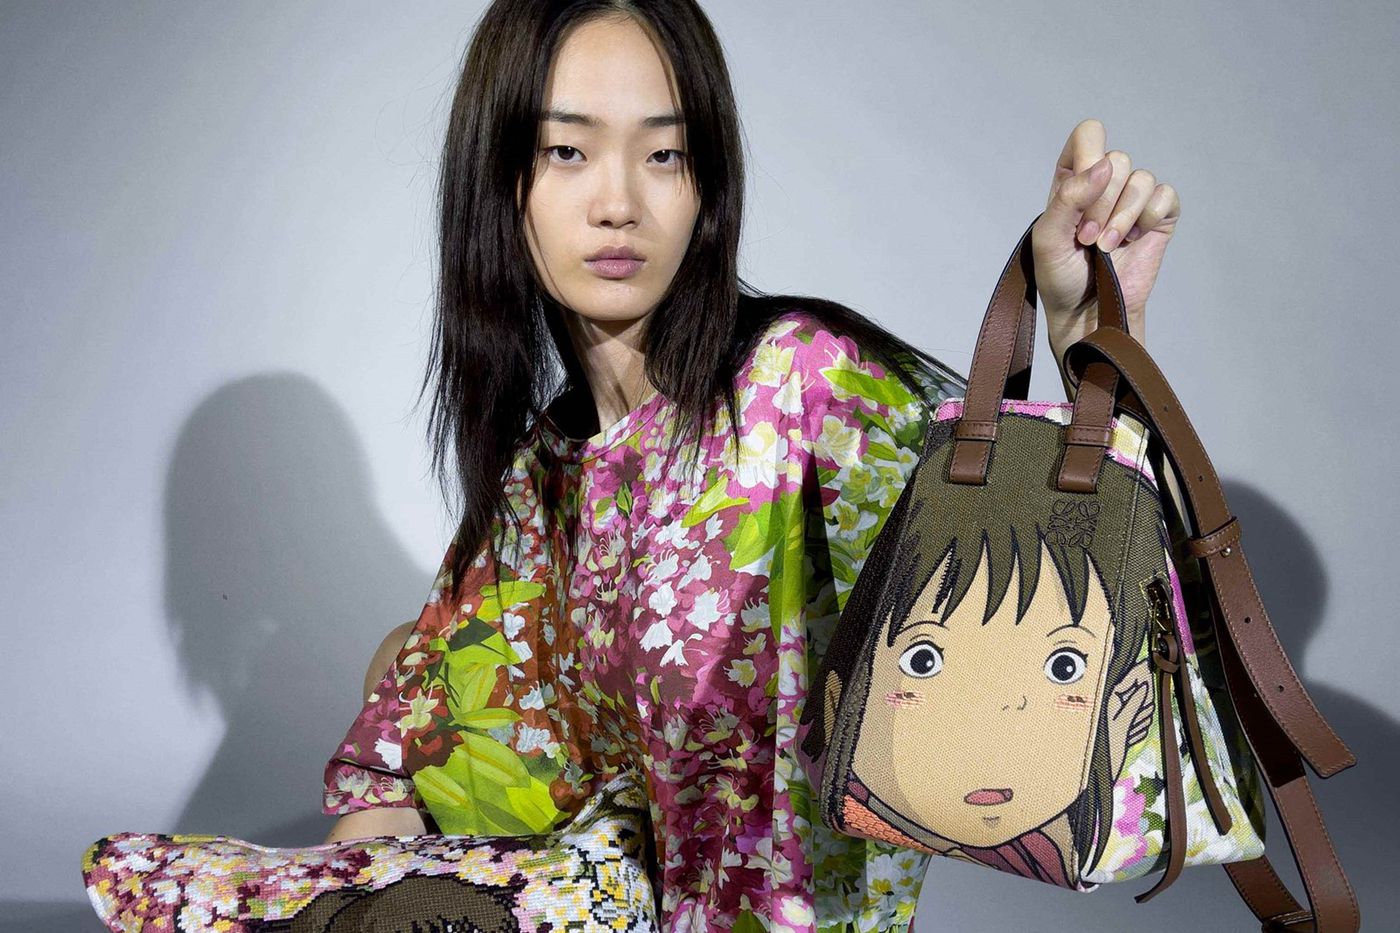 The hit anime spirited away appears on the new designs of the high-end brand loewe